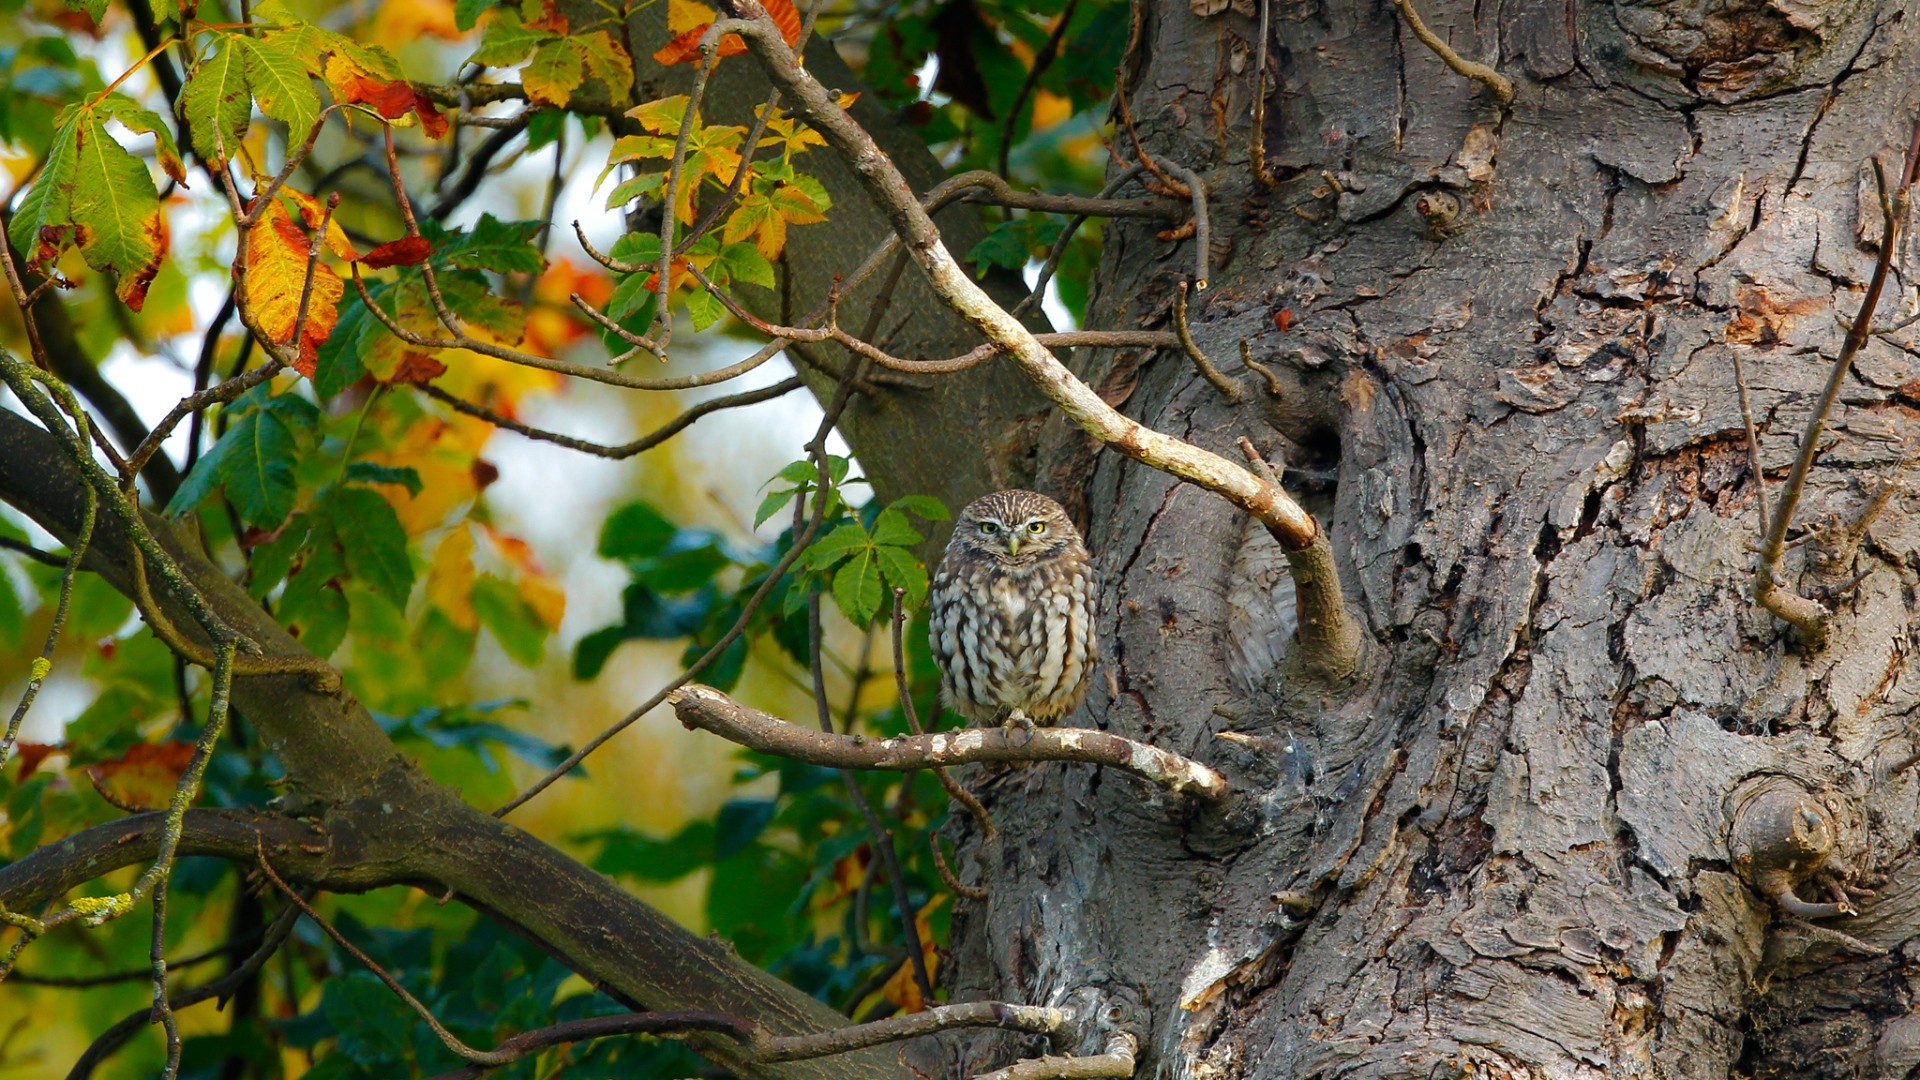 General 1920x1080 nature trees branch leaves animals birds owl sitting outdoors